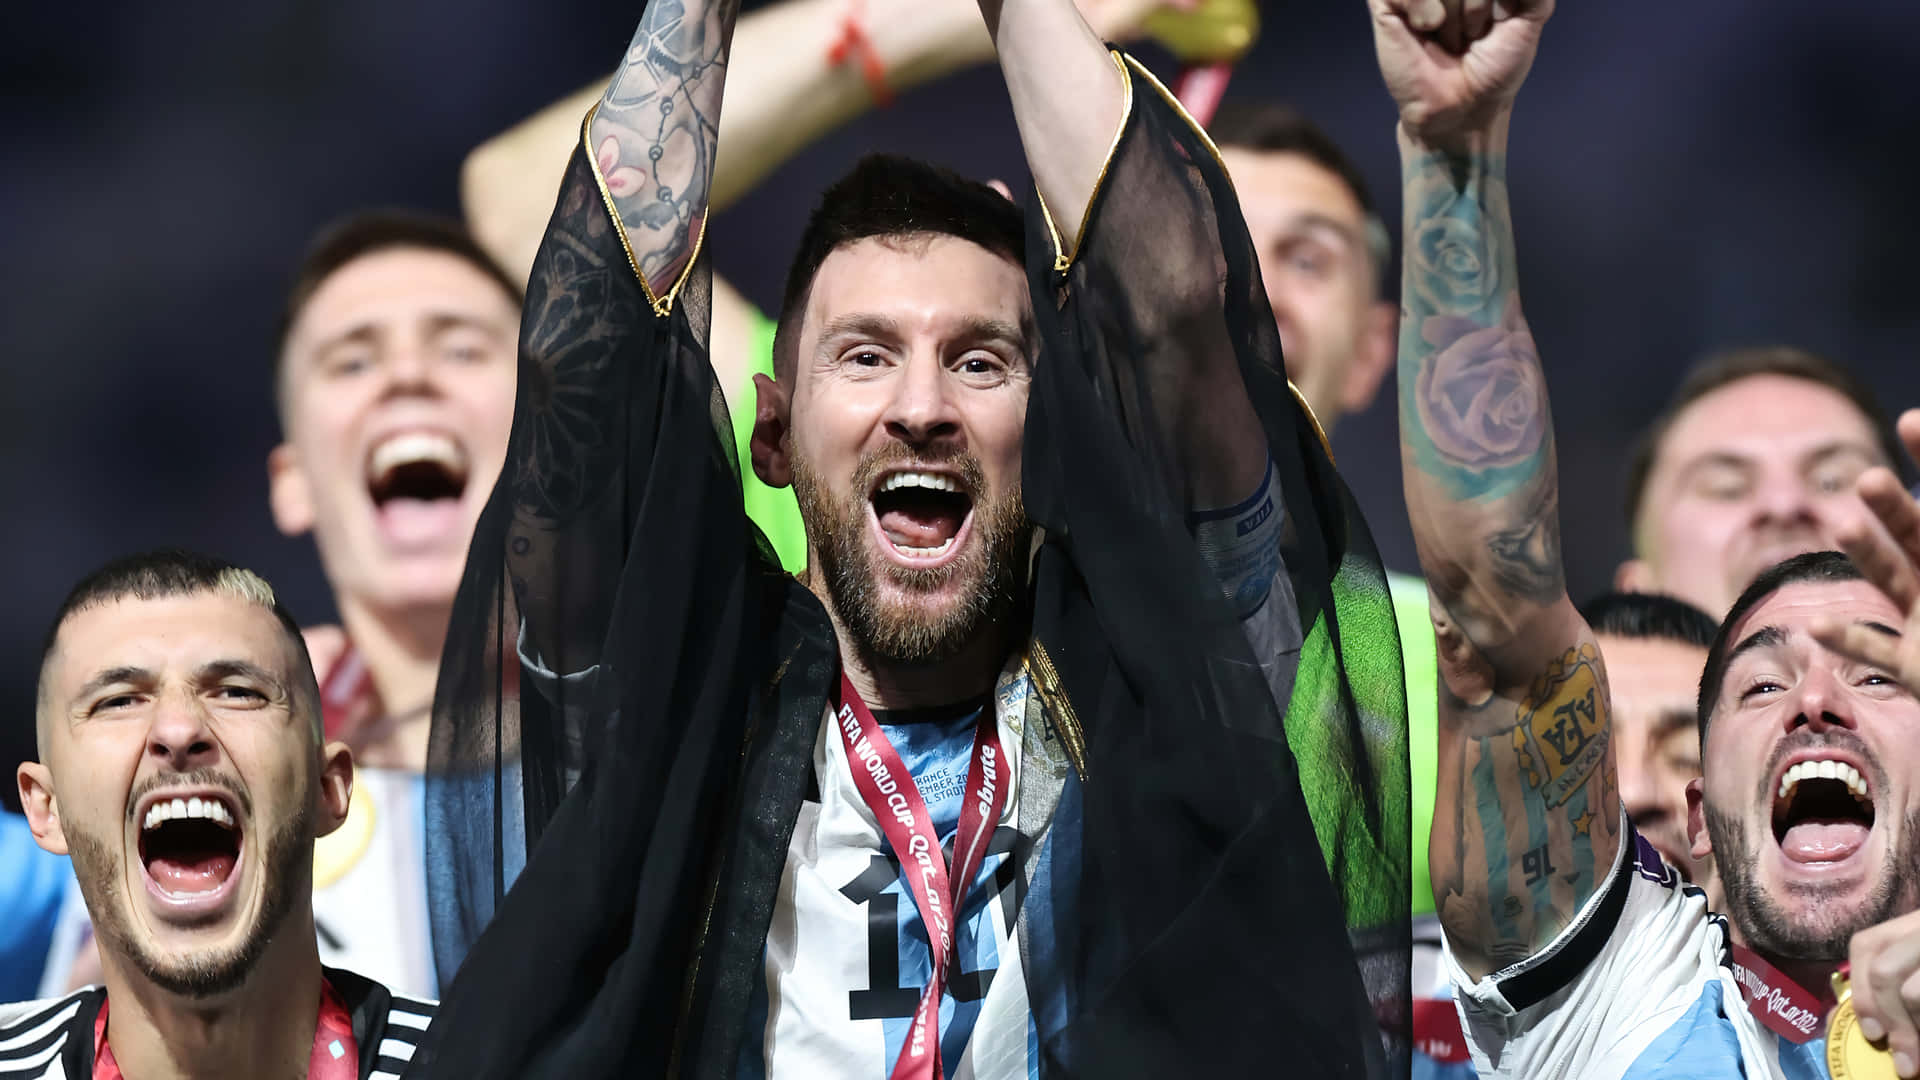 An amazing moment for soccer superstar Lionel Messi as he celebrates his win during a football match